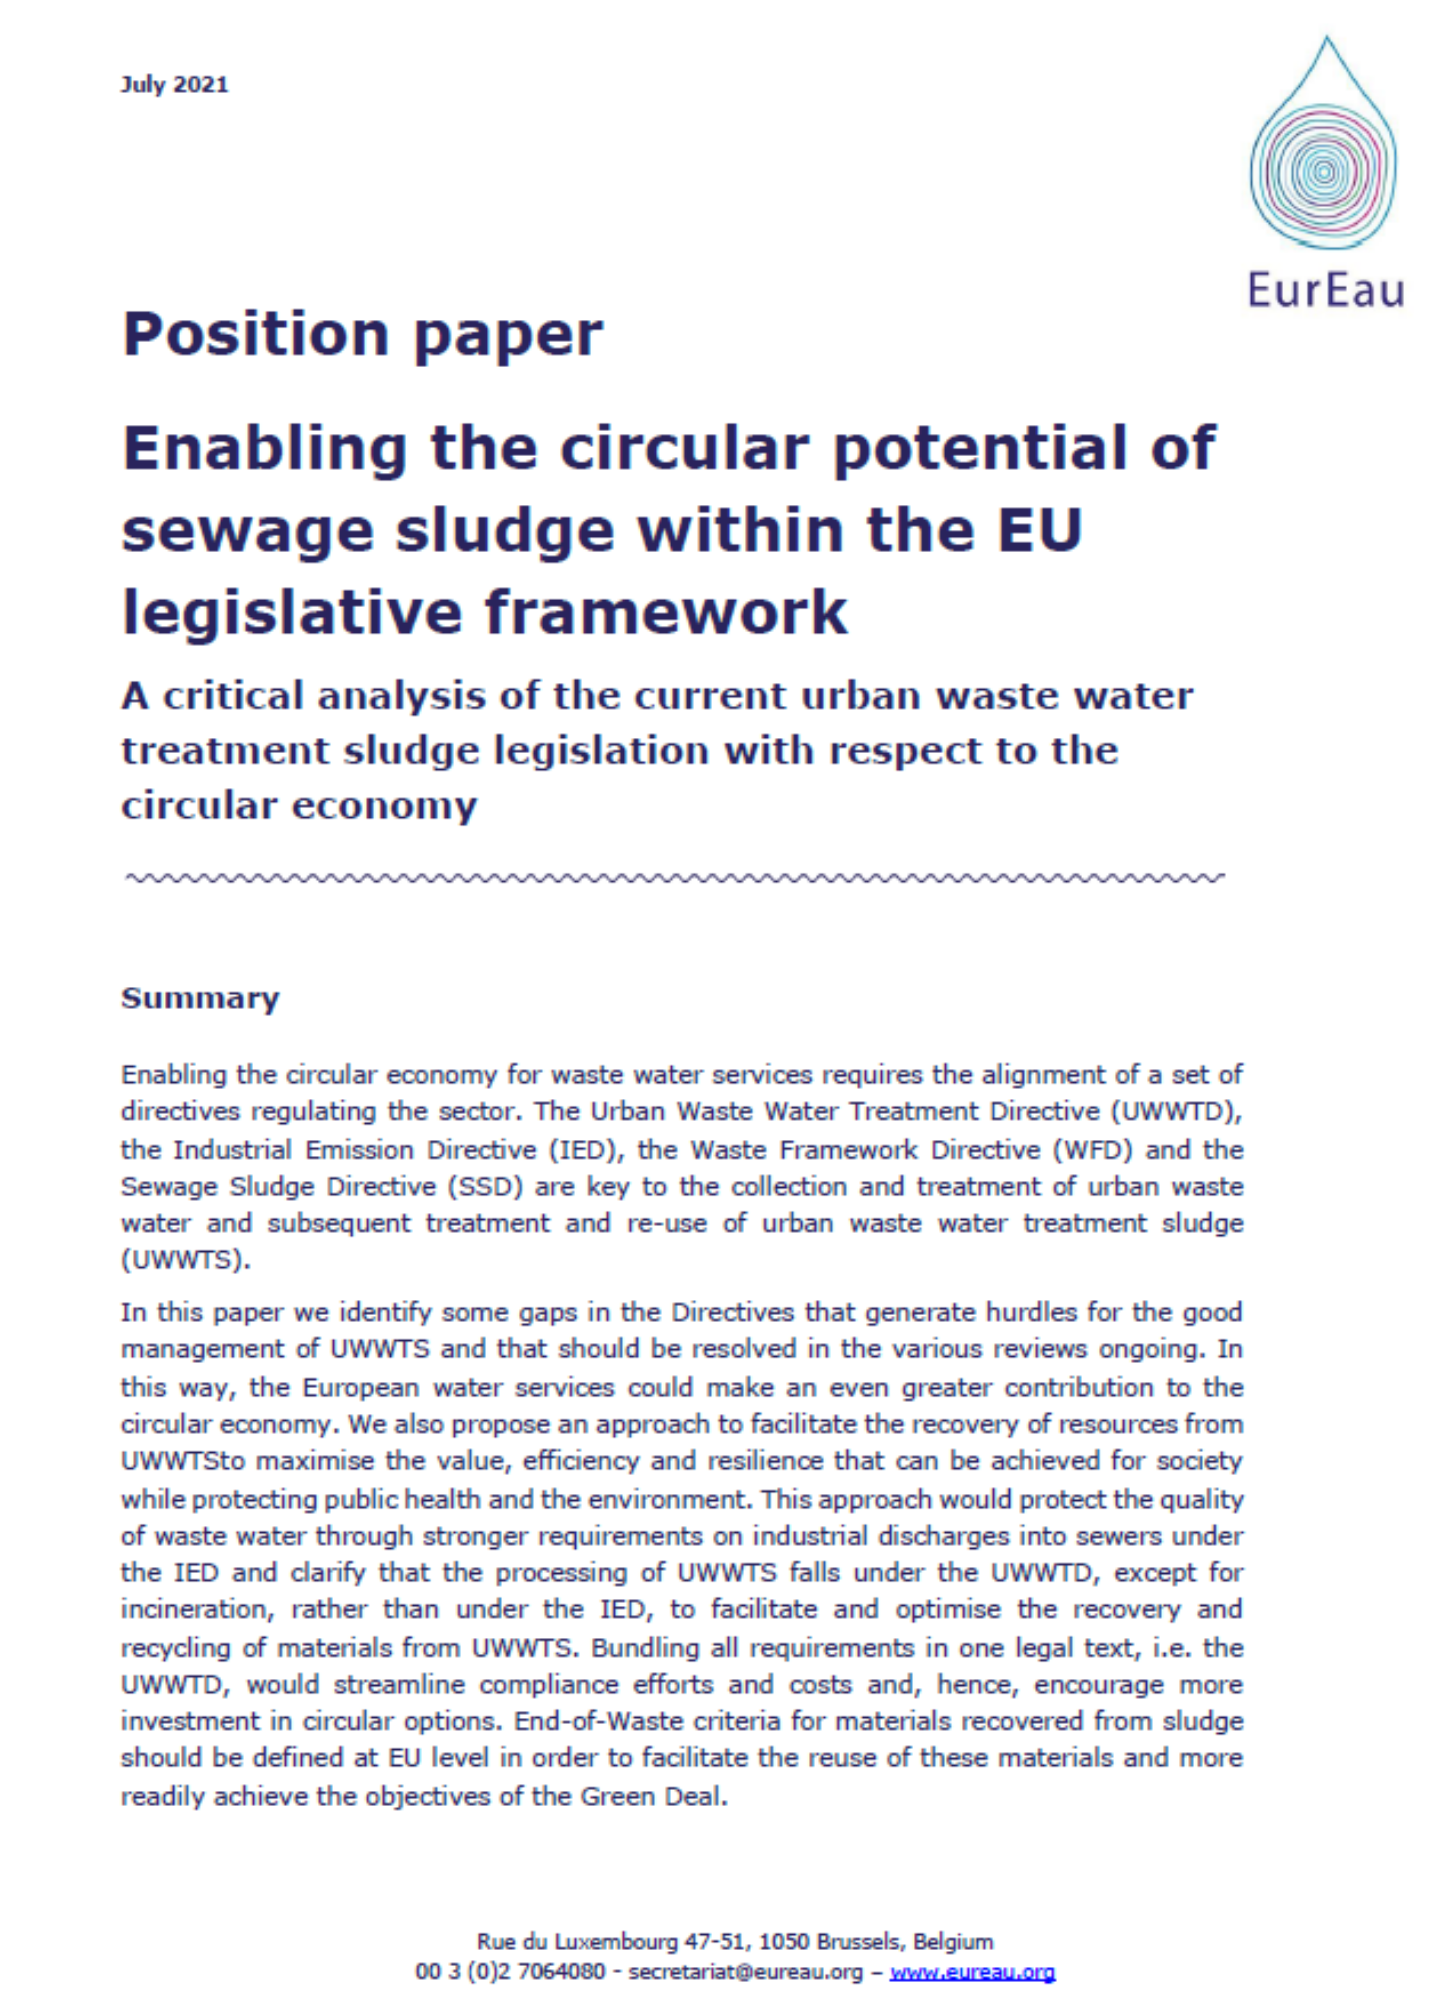 Position paper enabling the circular potential of sewage sludge